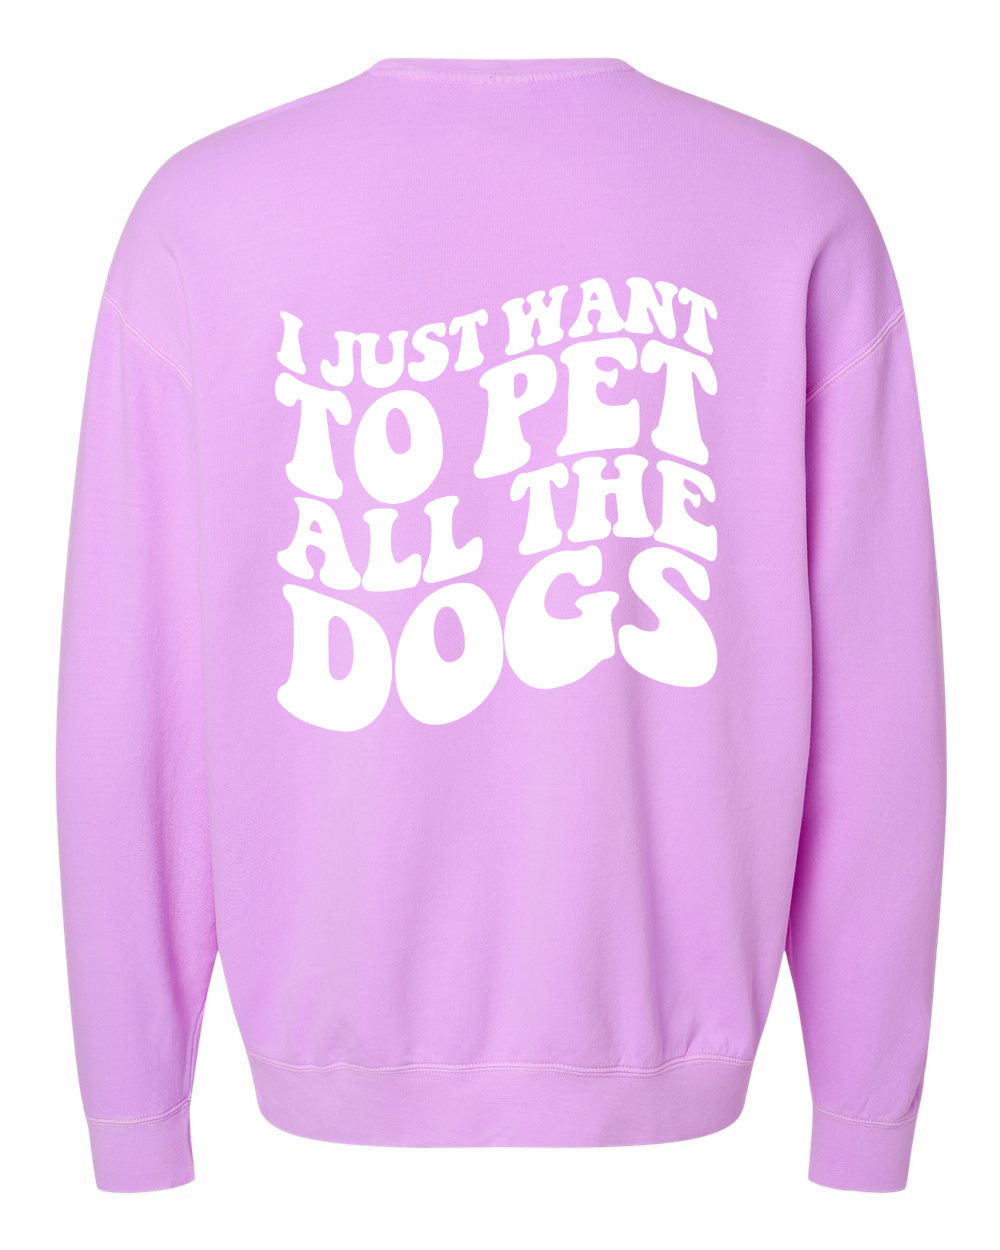 I Just Want To Pet All The Dogs Sweatshirt, Neon Violet